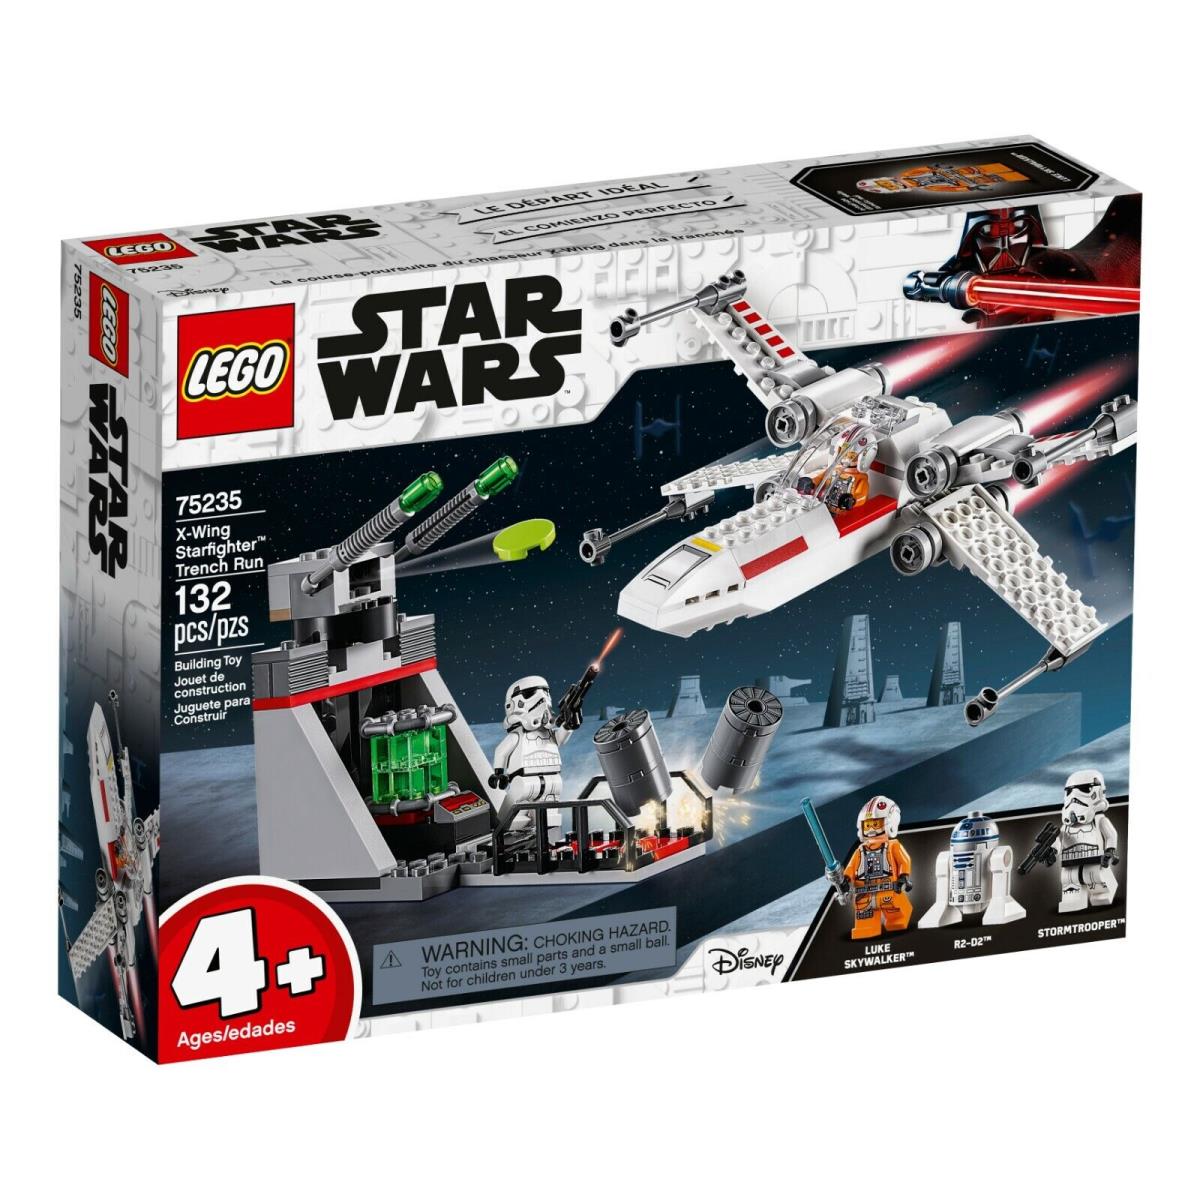 Lego Star Wars 75235 X-wing Starfighter Trench Run Condition